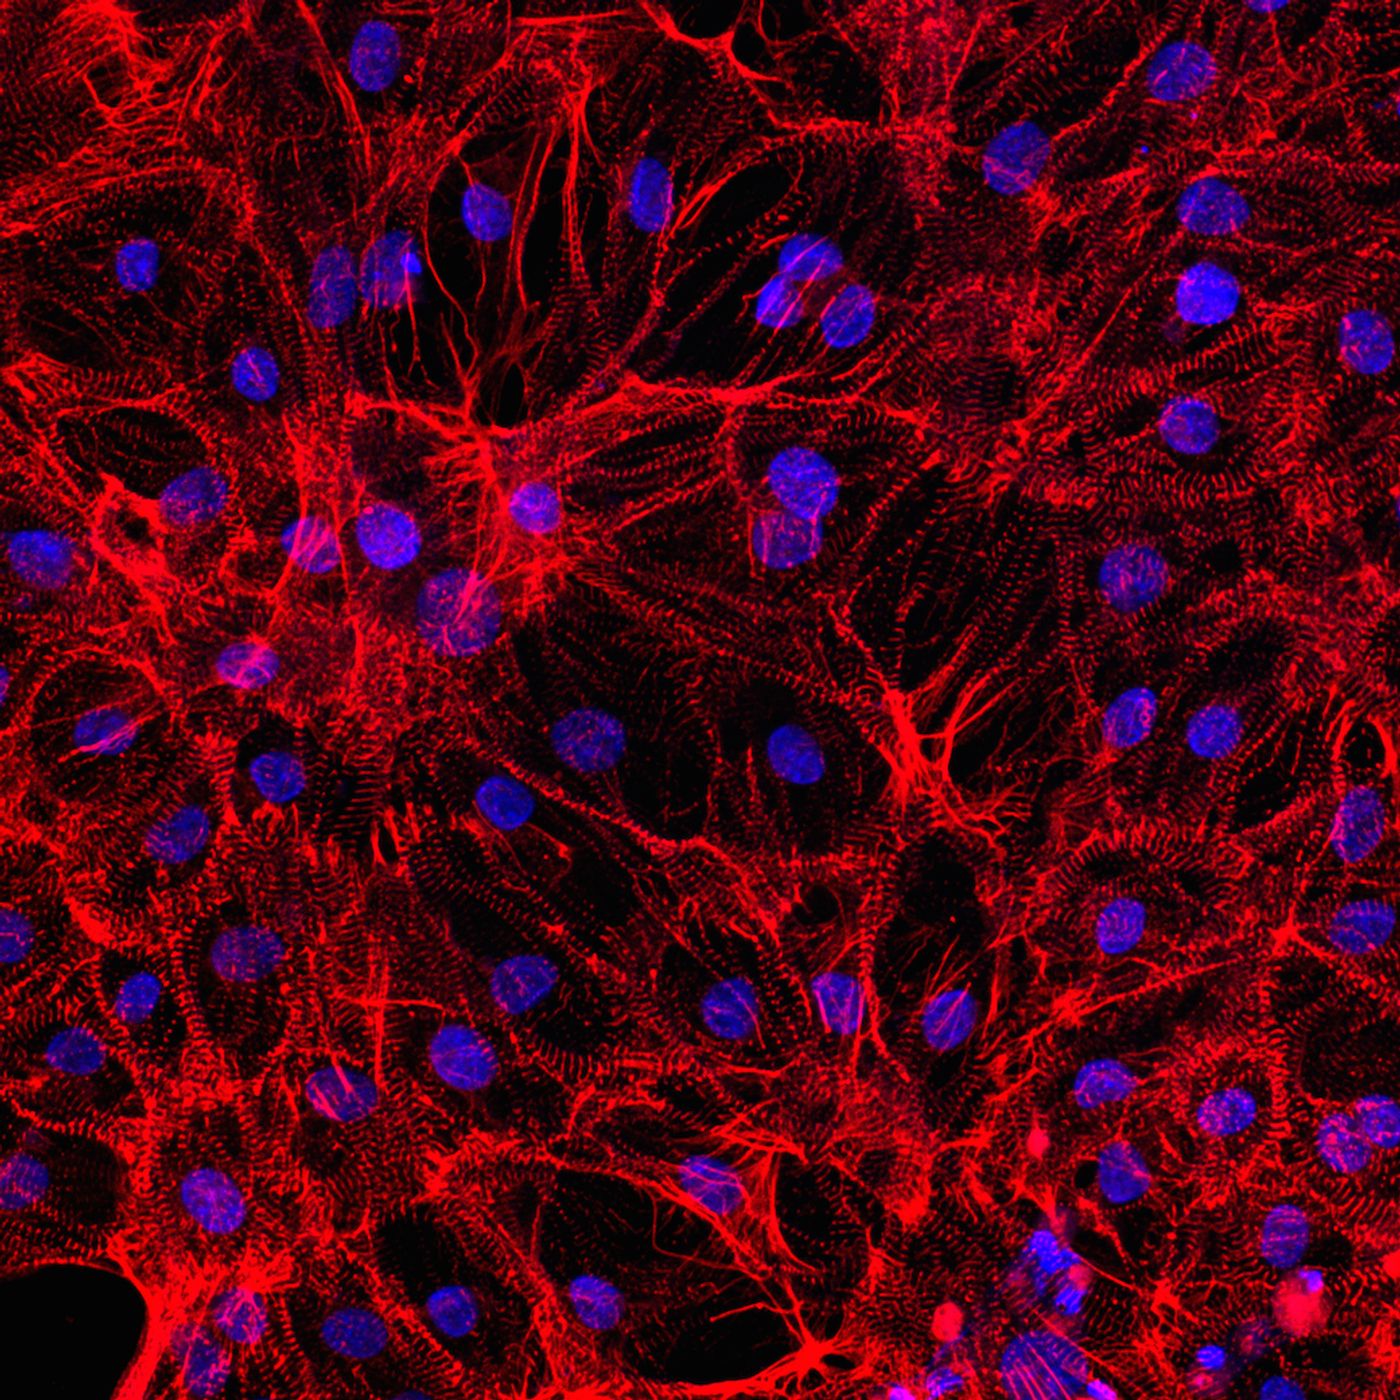 Human induced pluripotent stem cell-derived cardiomyocytes. Source: Axol Bioscience